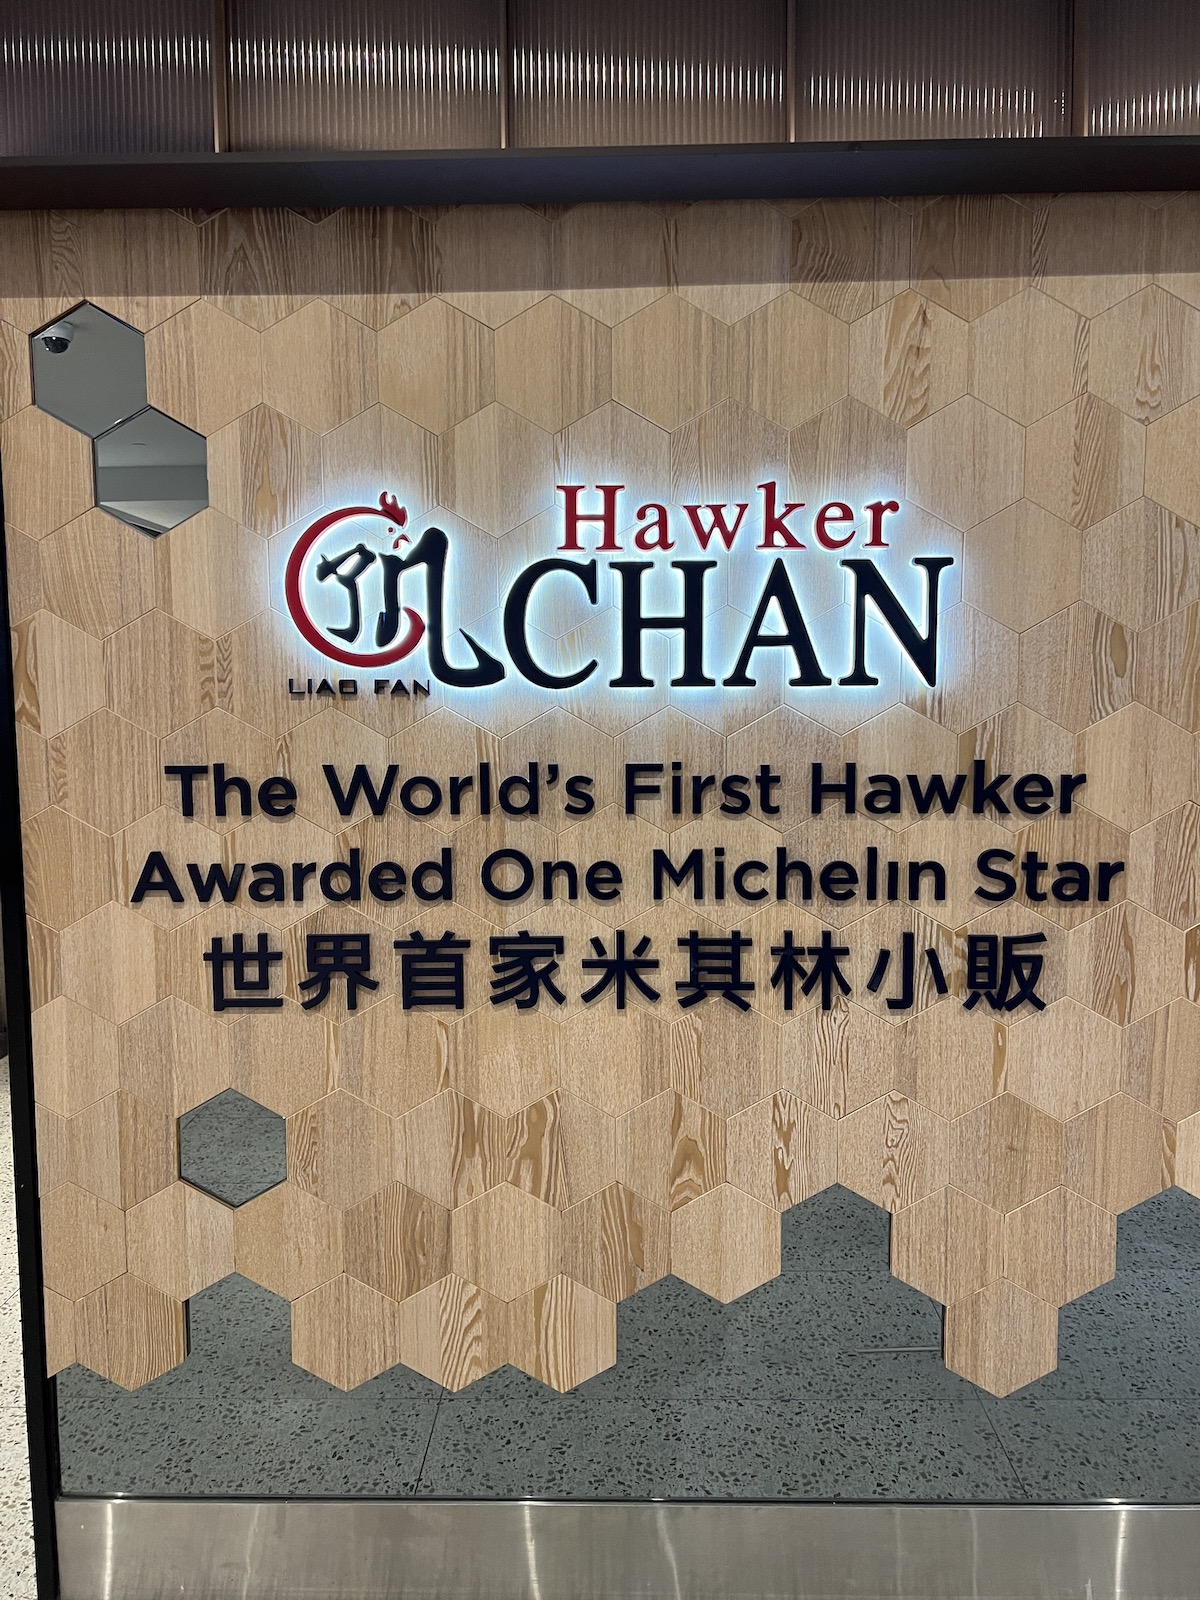 Singapore's Hawker Chan is in Taipei 101's Food Court